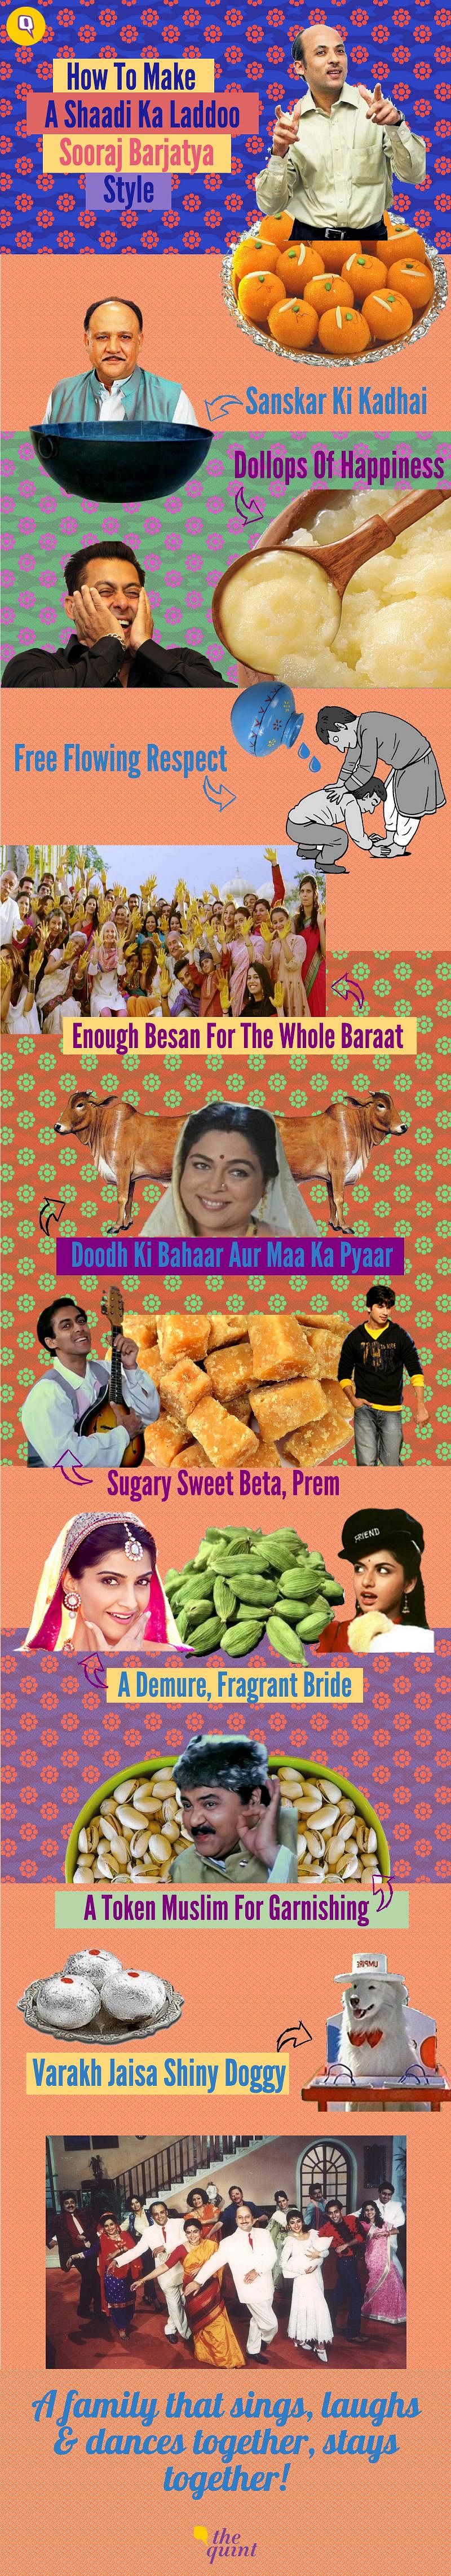 We share with you the filmmaker’s secret recipe for making perfect filmi weddings and laddoos. 